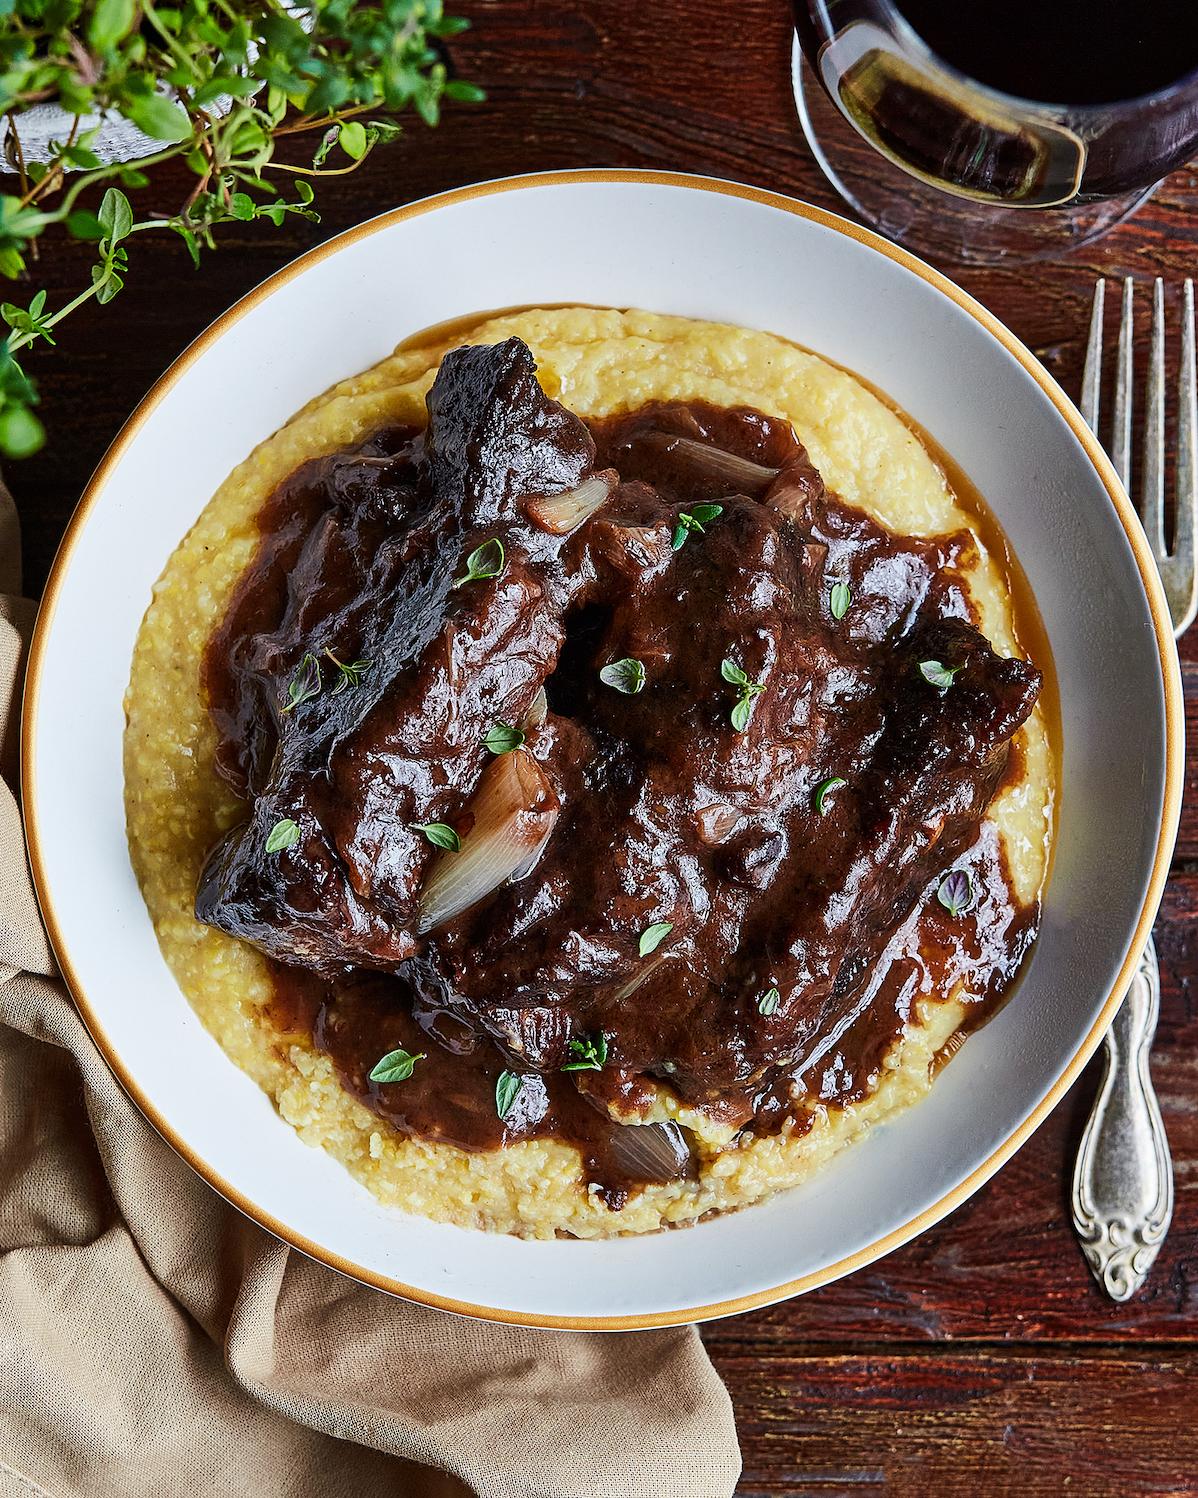  Pair these short ribs with a full-bodied red wine for a perfect dinner combination.